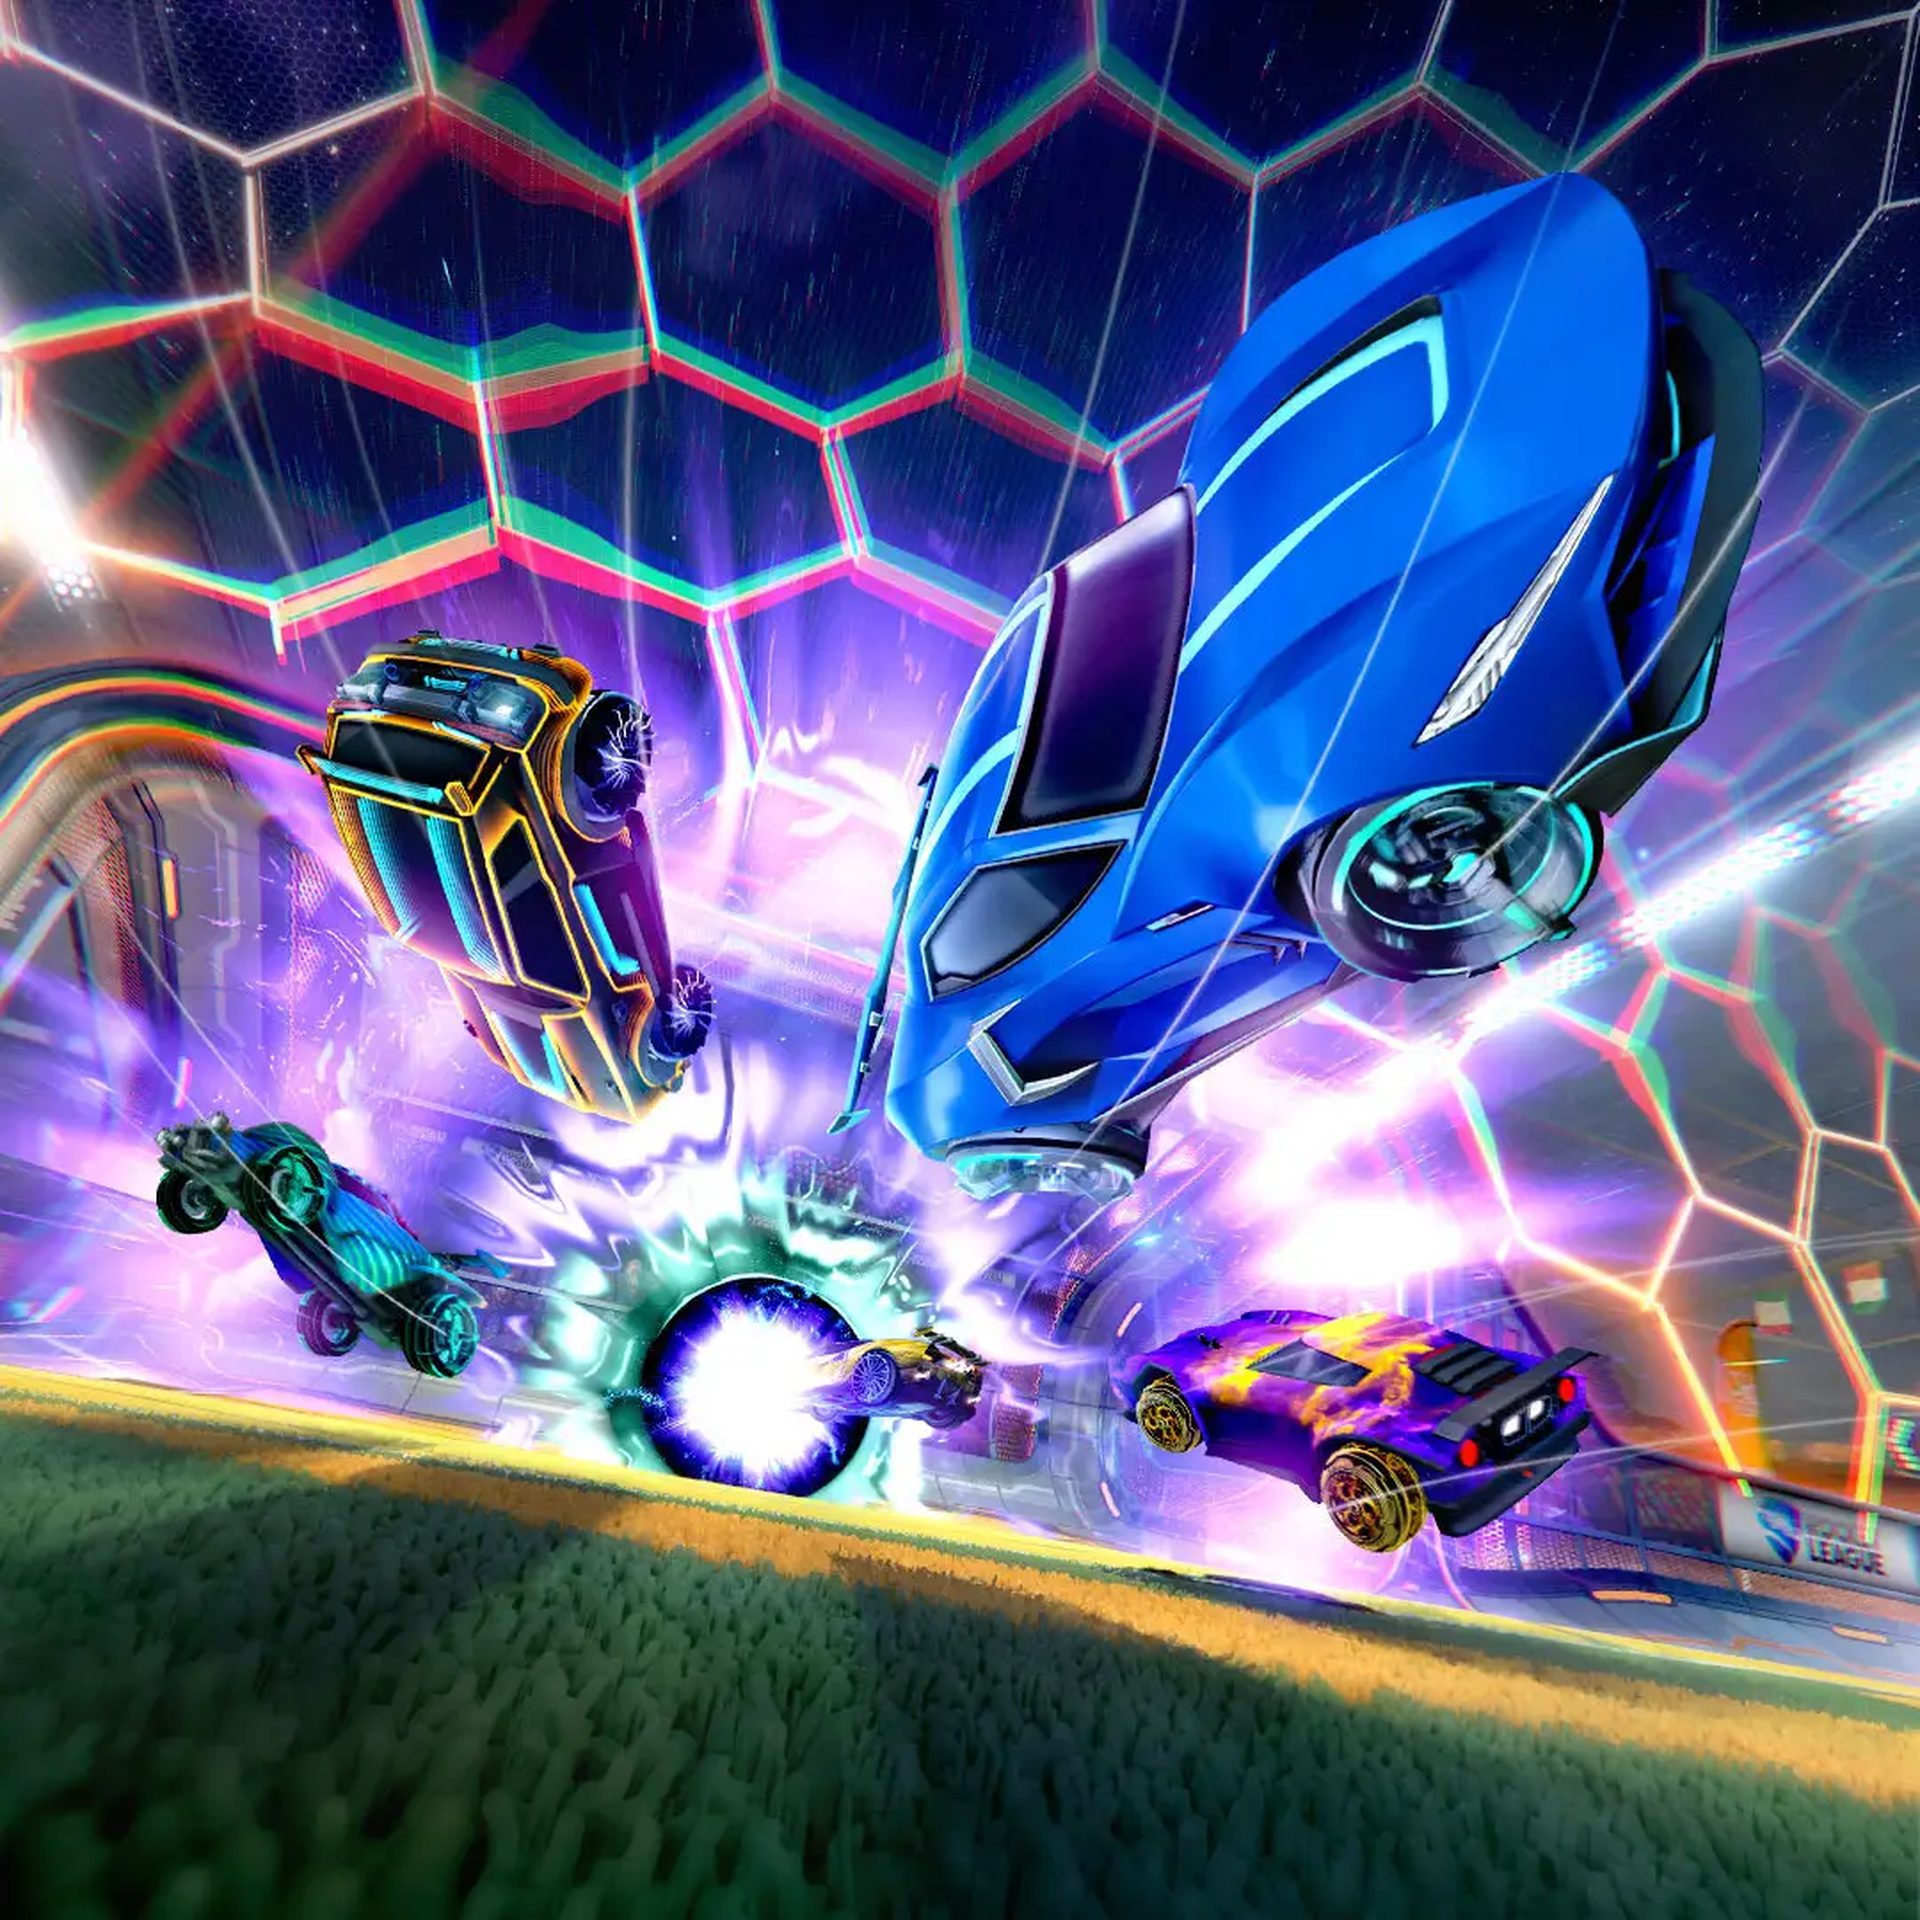 How to use faking in Rocket League?